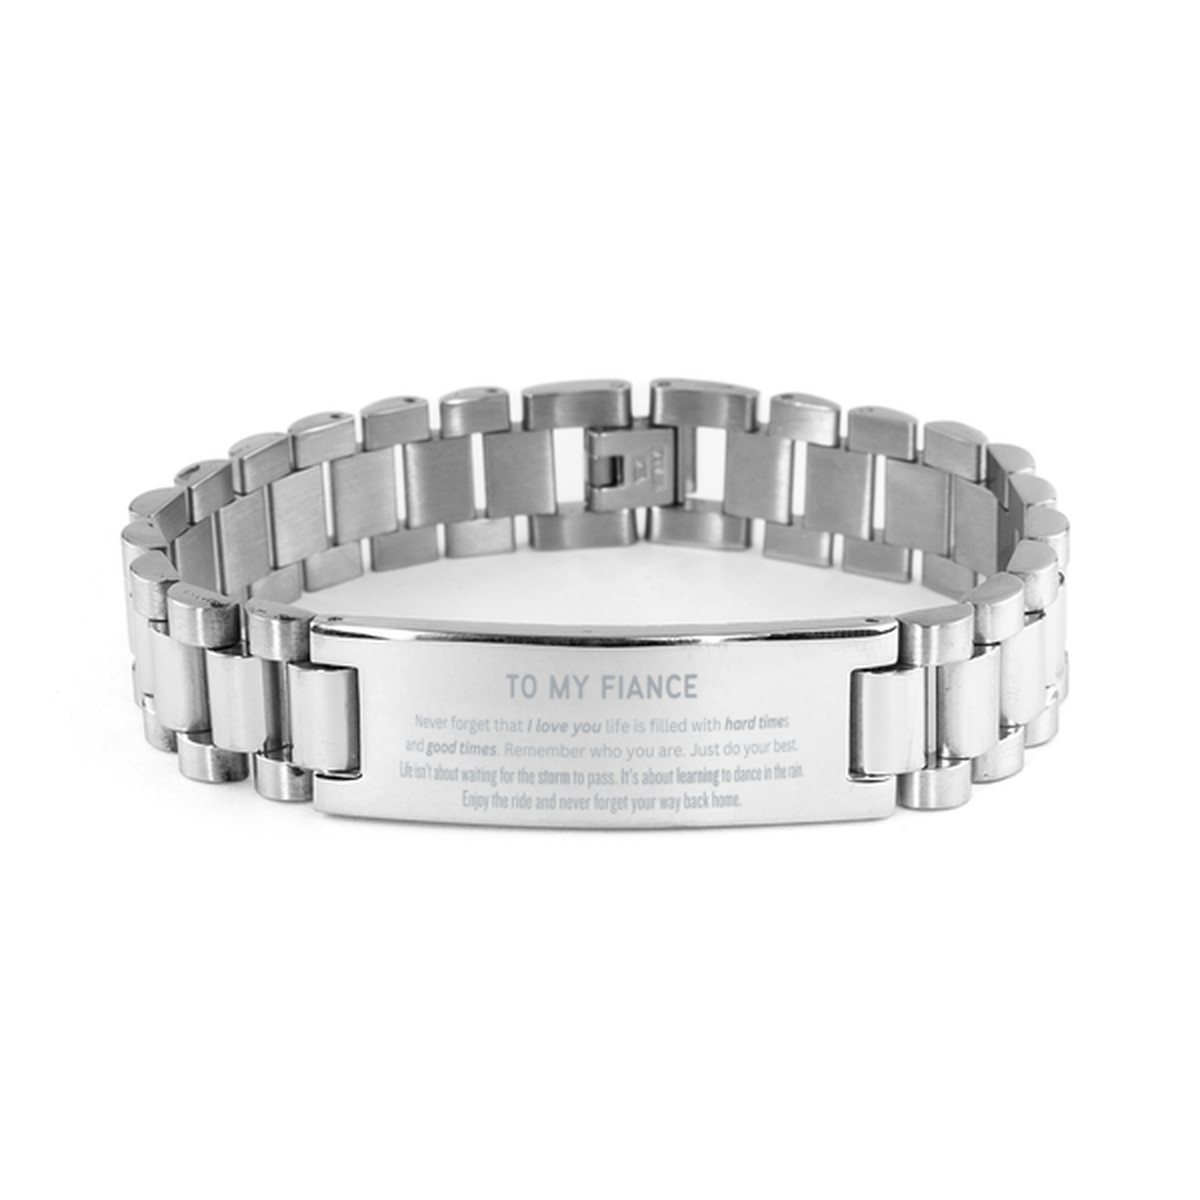 Christmas Fiance Ladder Stainless Steel Bracelet Gifts, To My Fiance Birthday Thank You Gifts For Fiance, Graduation Unique Gifts For Fiance To My Fiance Never forget that I love you life is filled with hard times and good times. Remember who you are. Jus